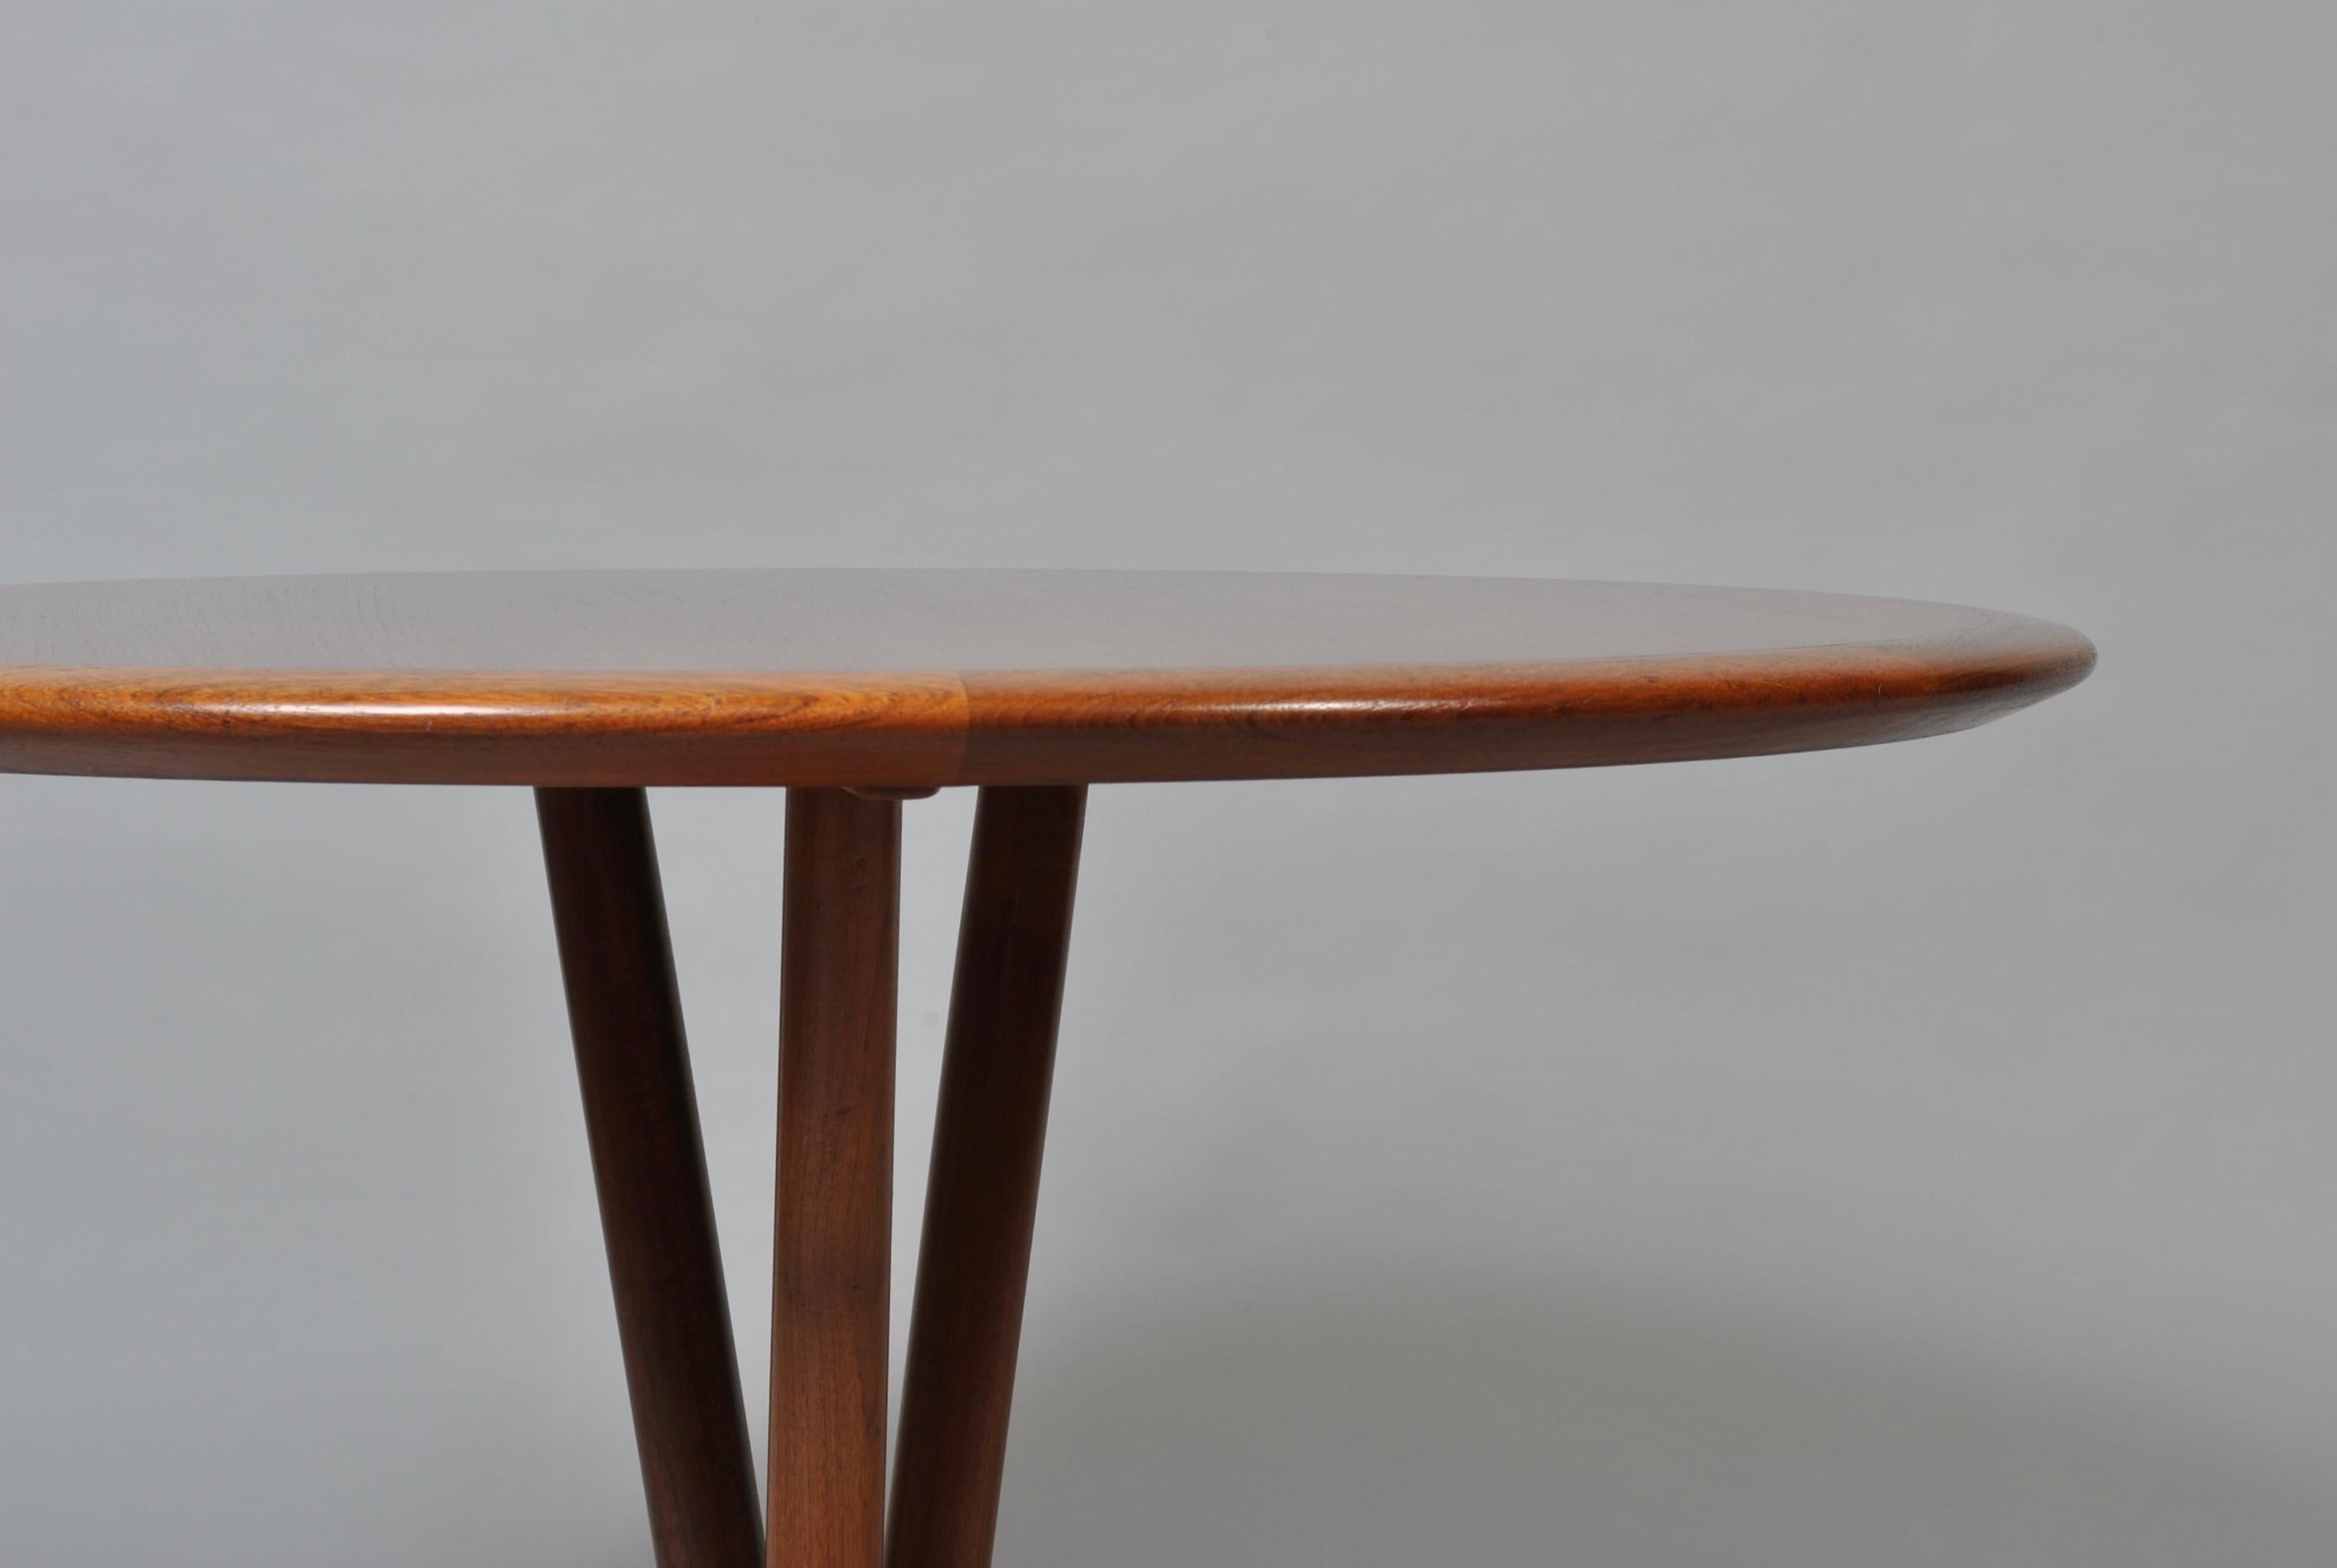 Superior design and construction of this Danish teak coffee table. Produced, circa 1960s. Highly unusual tri-leg design base. Beautifully crafted and with a superb aged colouring. Easily dismantled for safe shipping (if required). Terrific